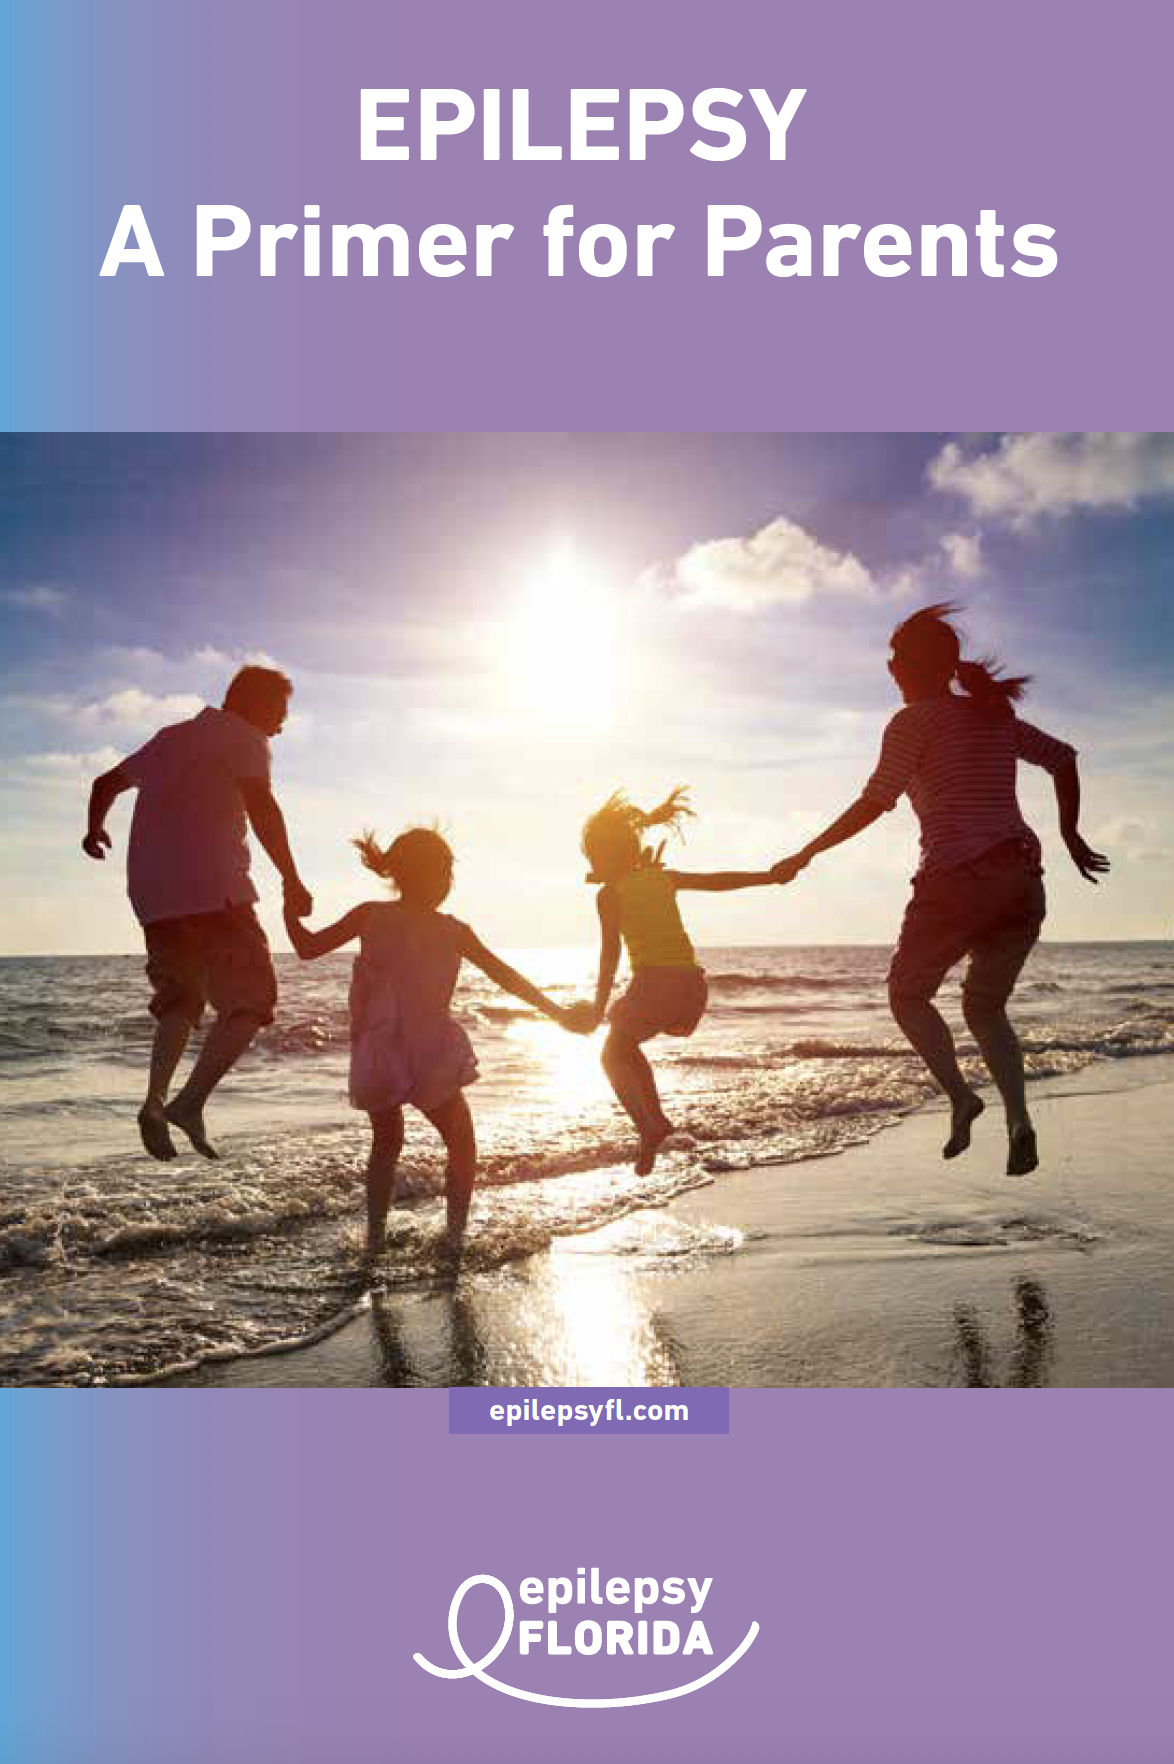 Epilepsy Florida - A Primer for Parents of Children with Epilepsy booklet